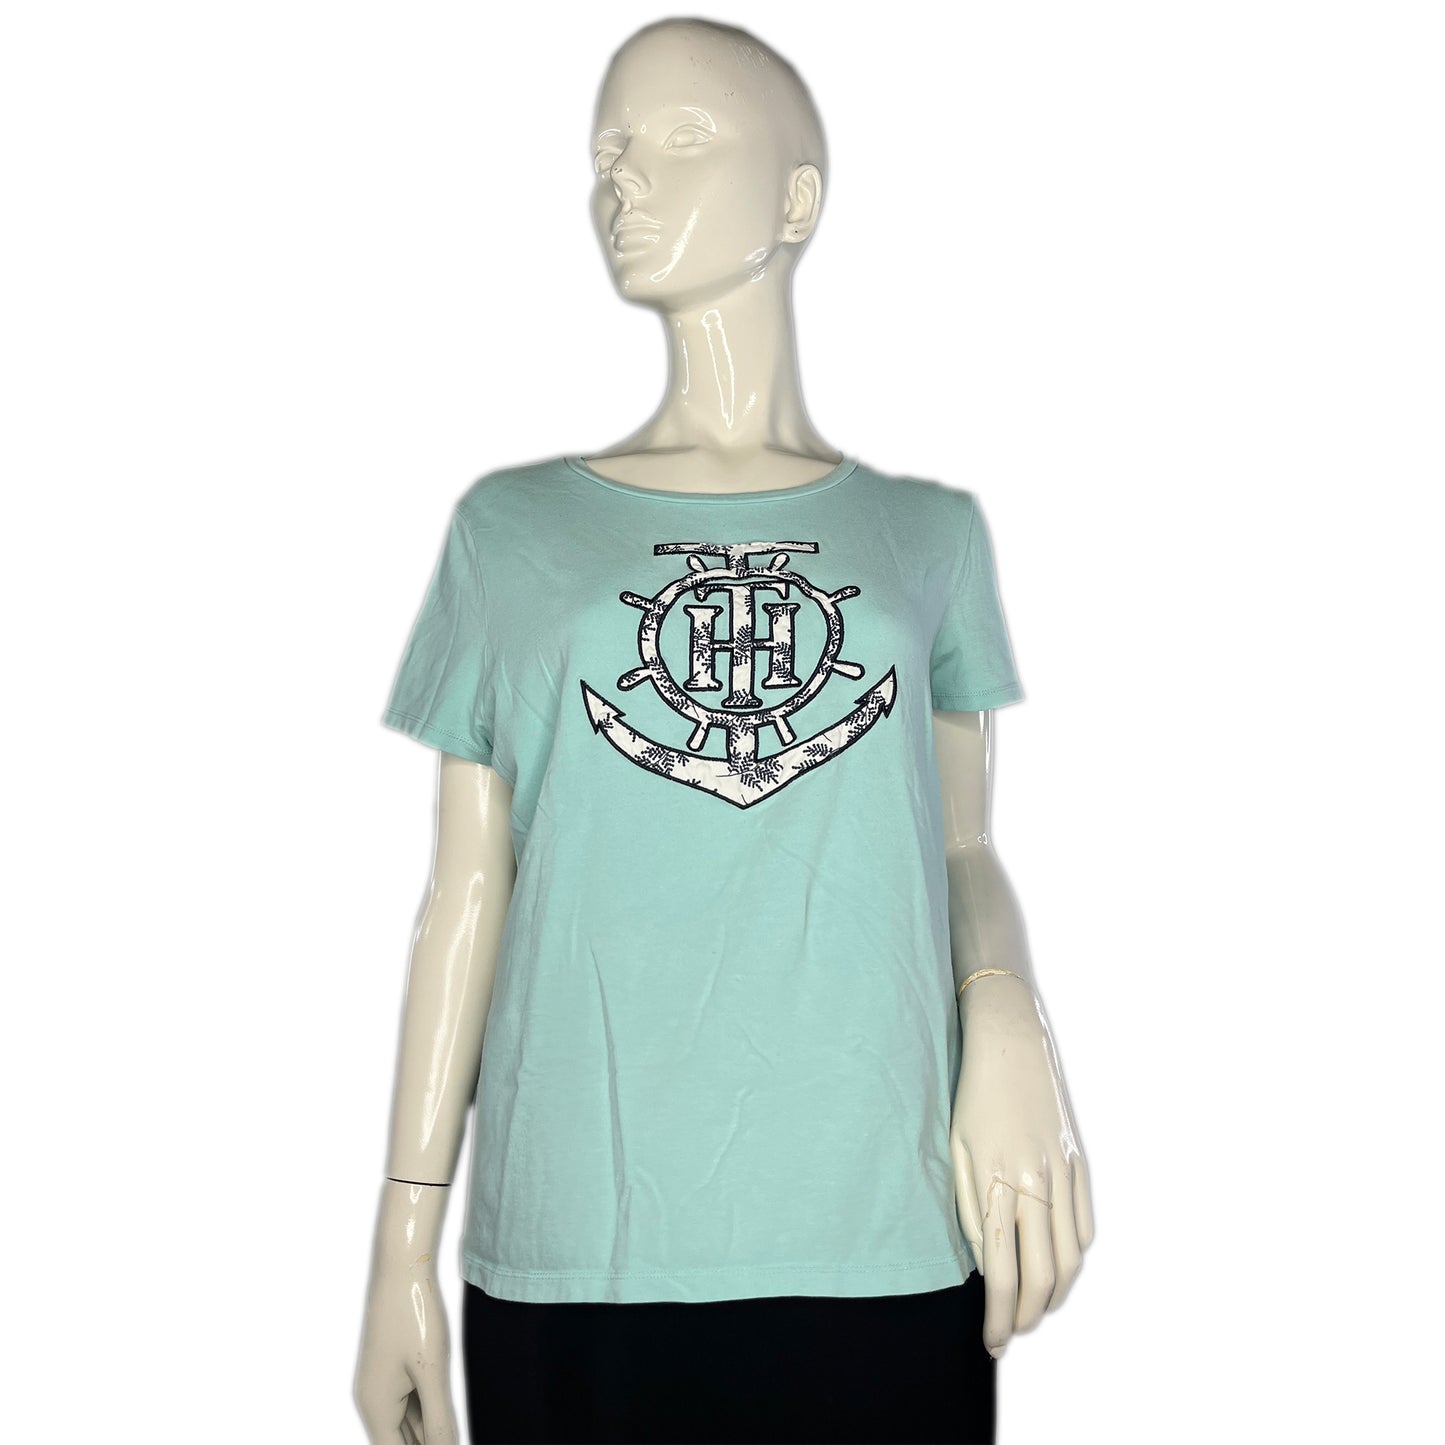 Tommy Hilfiger Top Short Sleeve Anchor Graphic Light Blue, Navy Blue, White Size XL SKU 000267-7